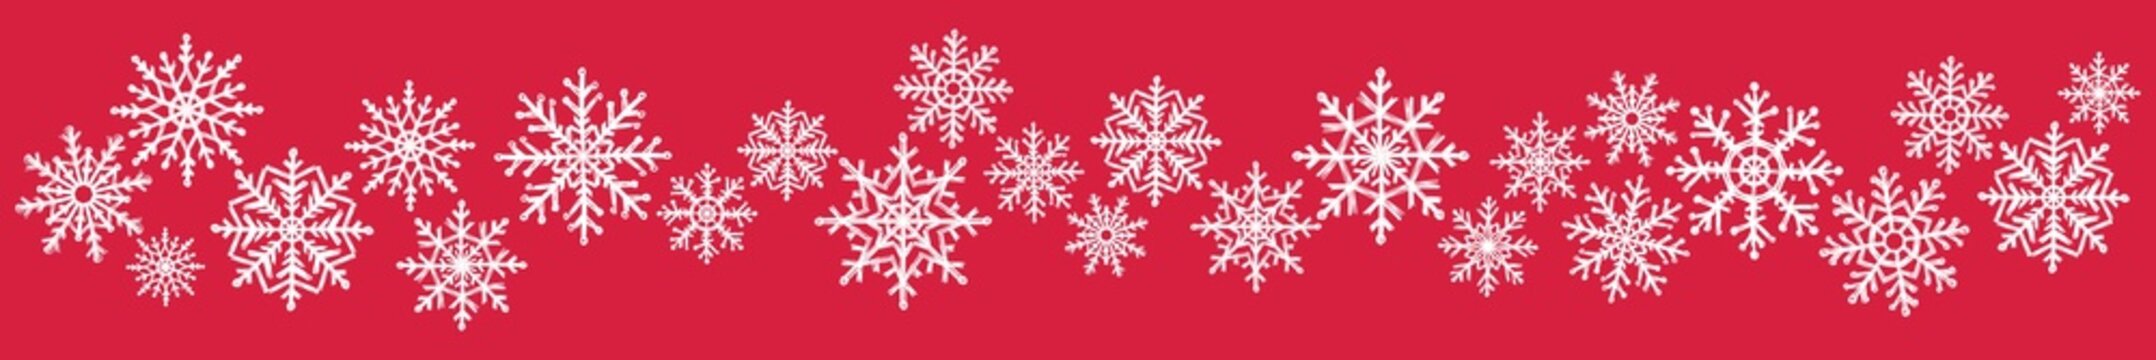 Horizontal pattern with snowflakes, hand-drawn